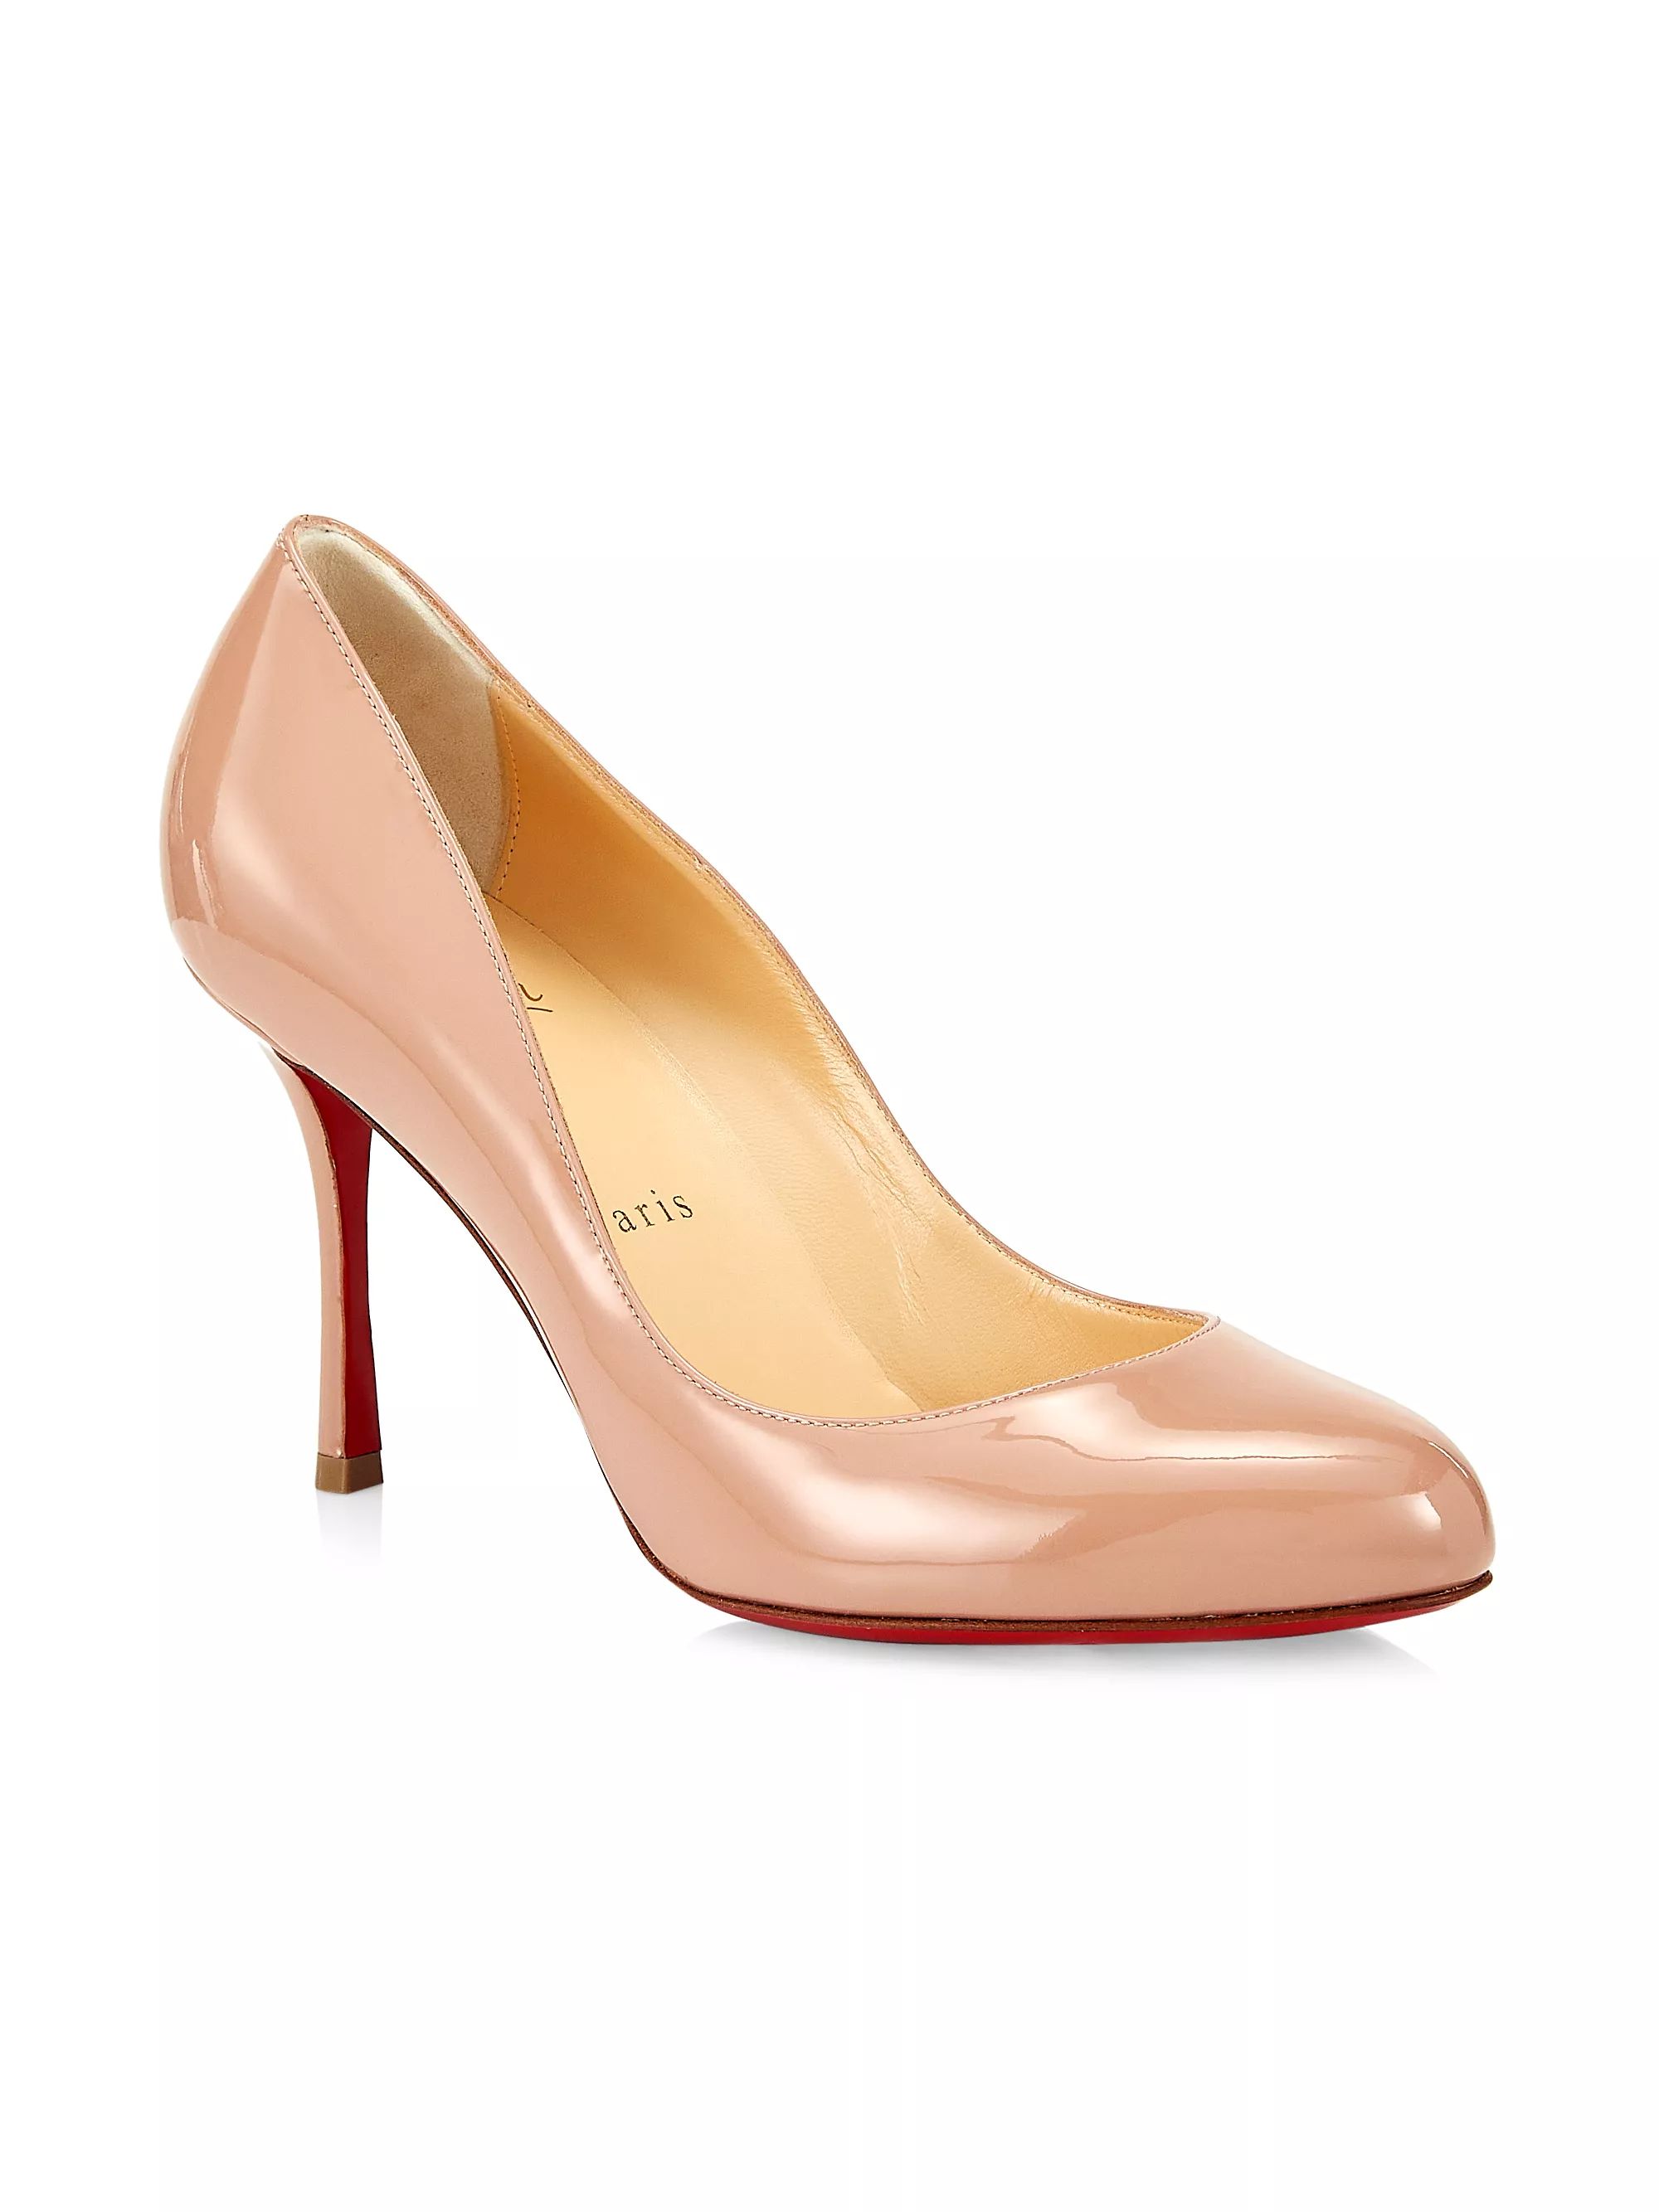 Dolly 85 Patent Leather Pumps | Saks Fifth Avenue